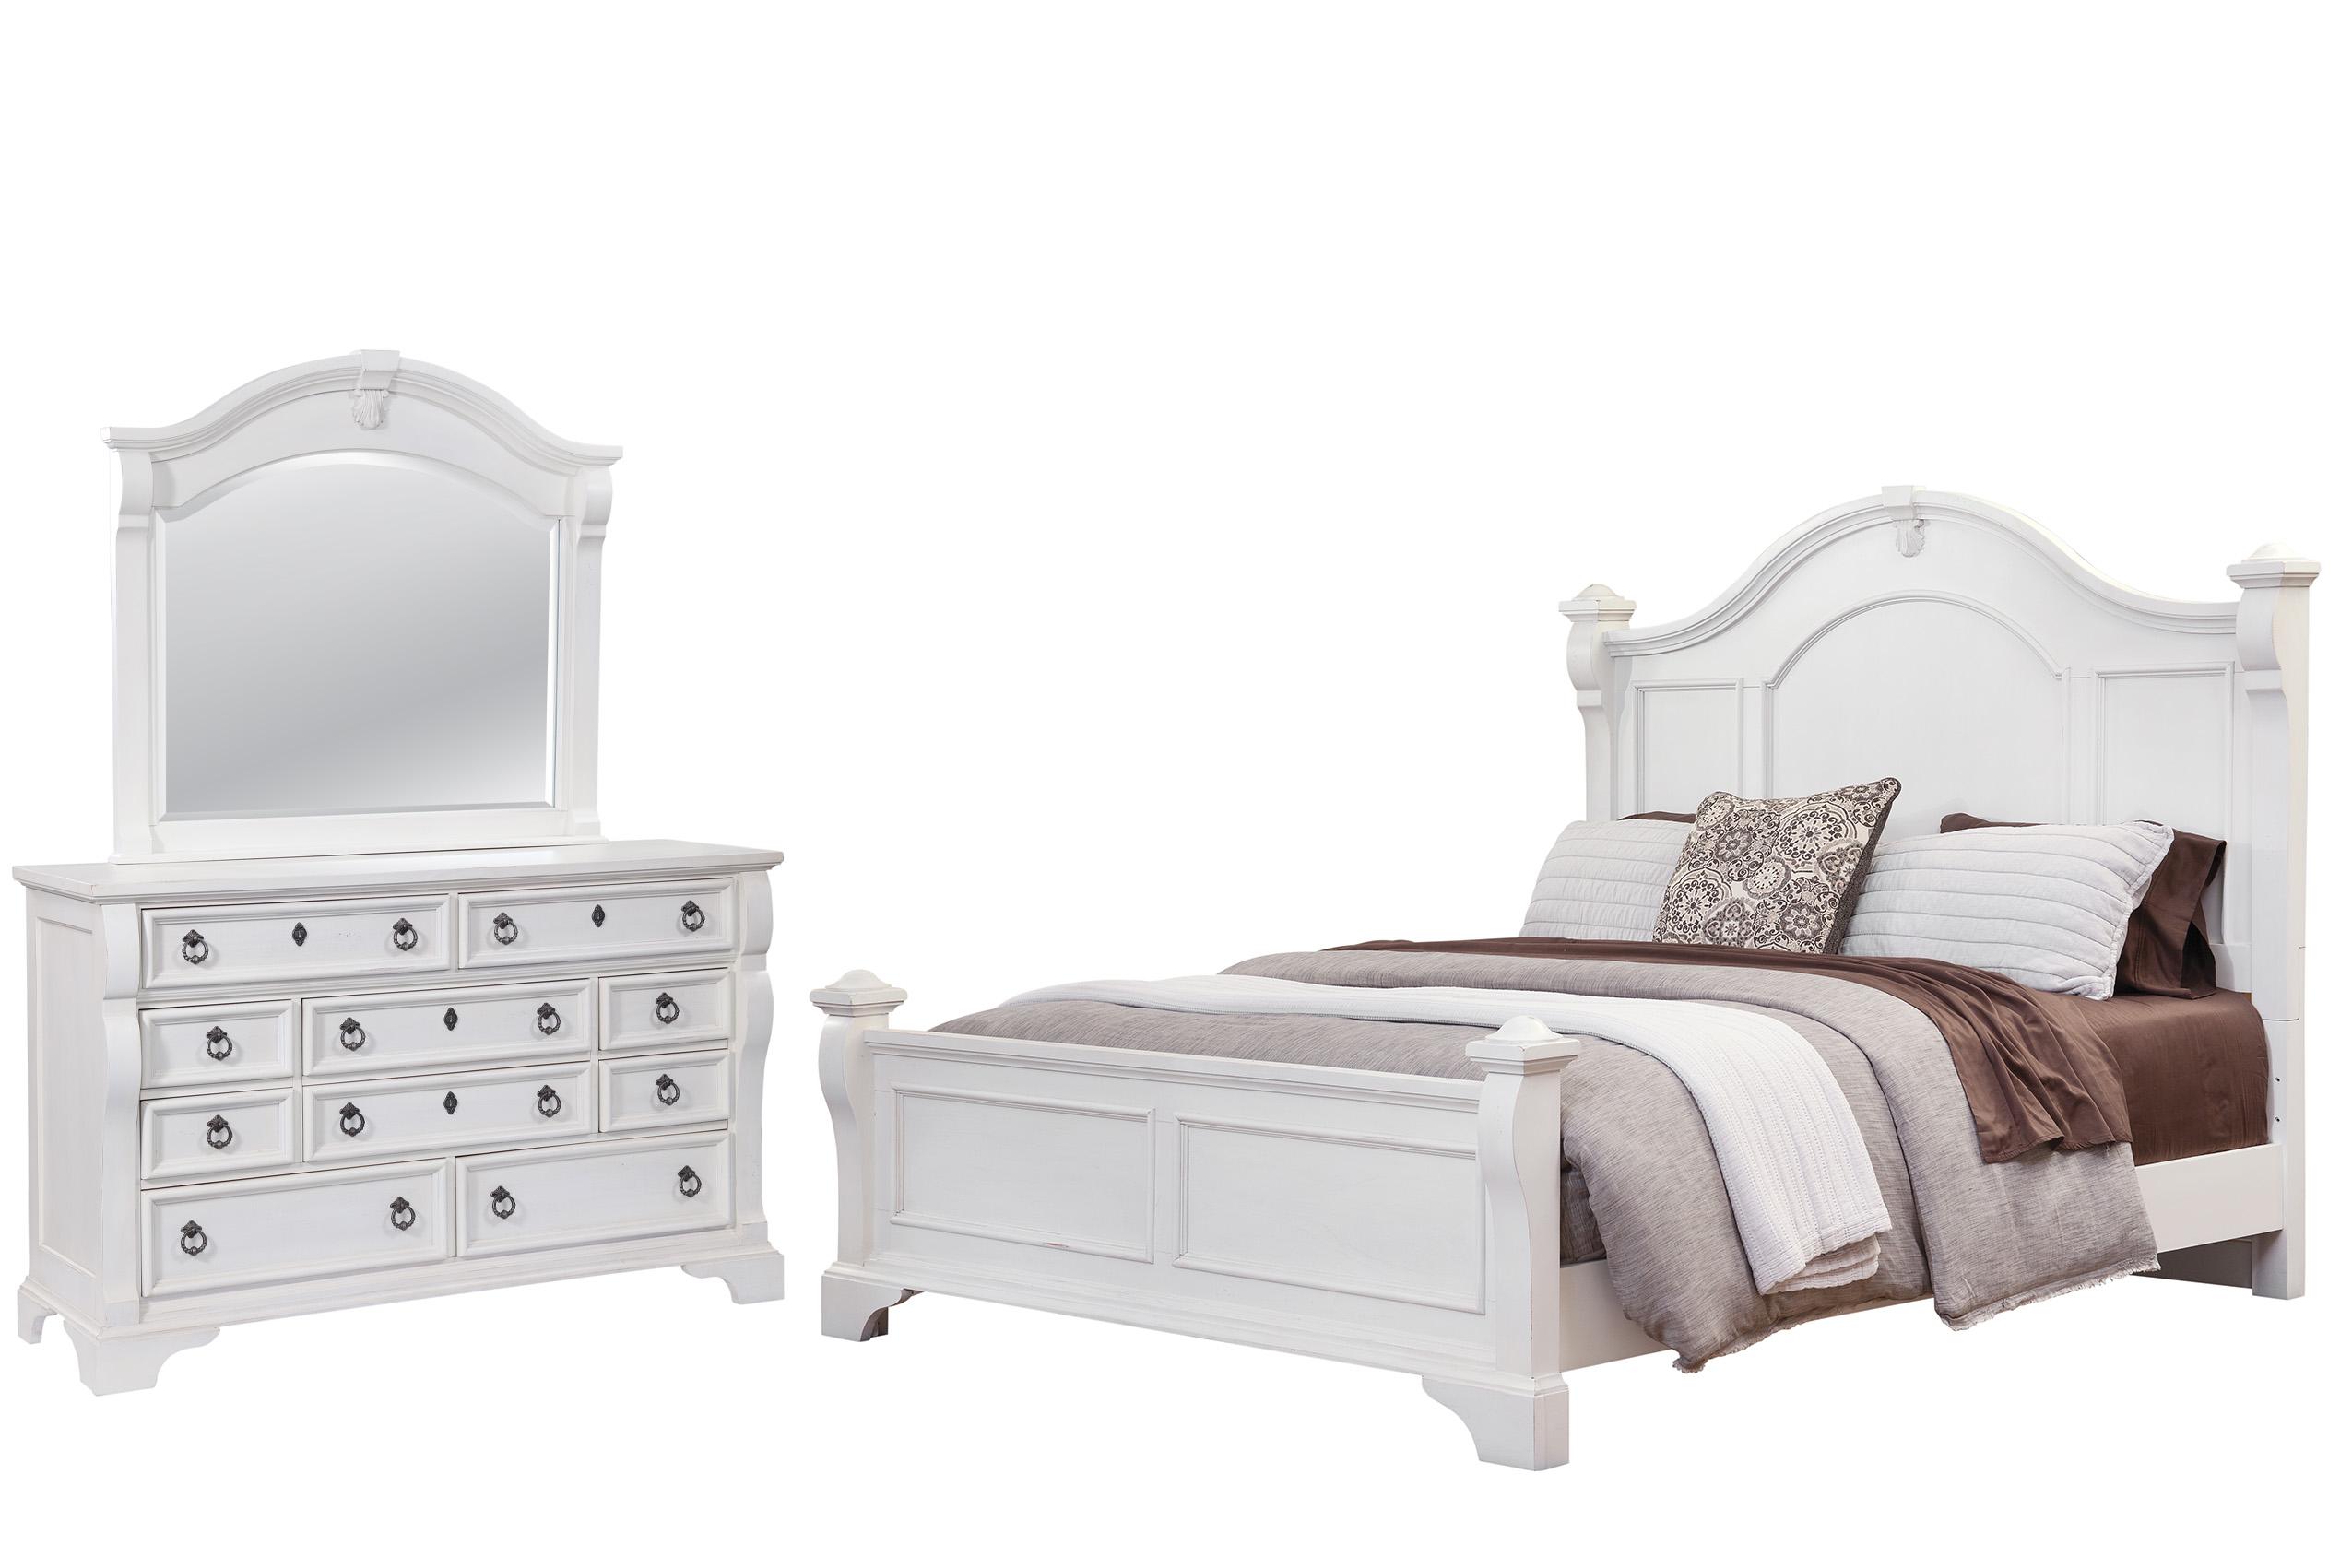 Classic, Traditional, Cottage Poster Bedroom Set HEIRLOOM 2910-50POS 2910-QPOPO-3PC in White 